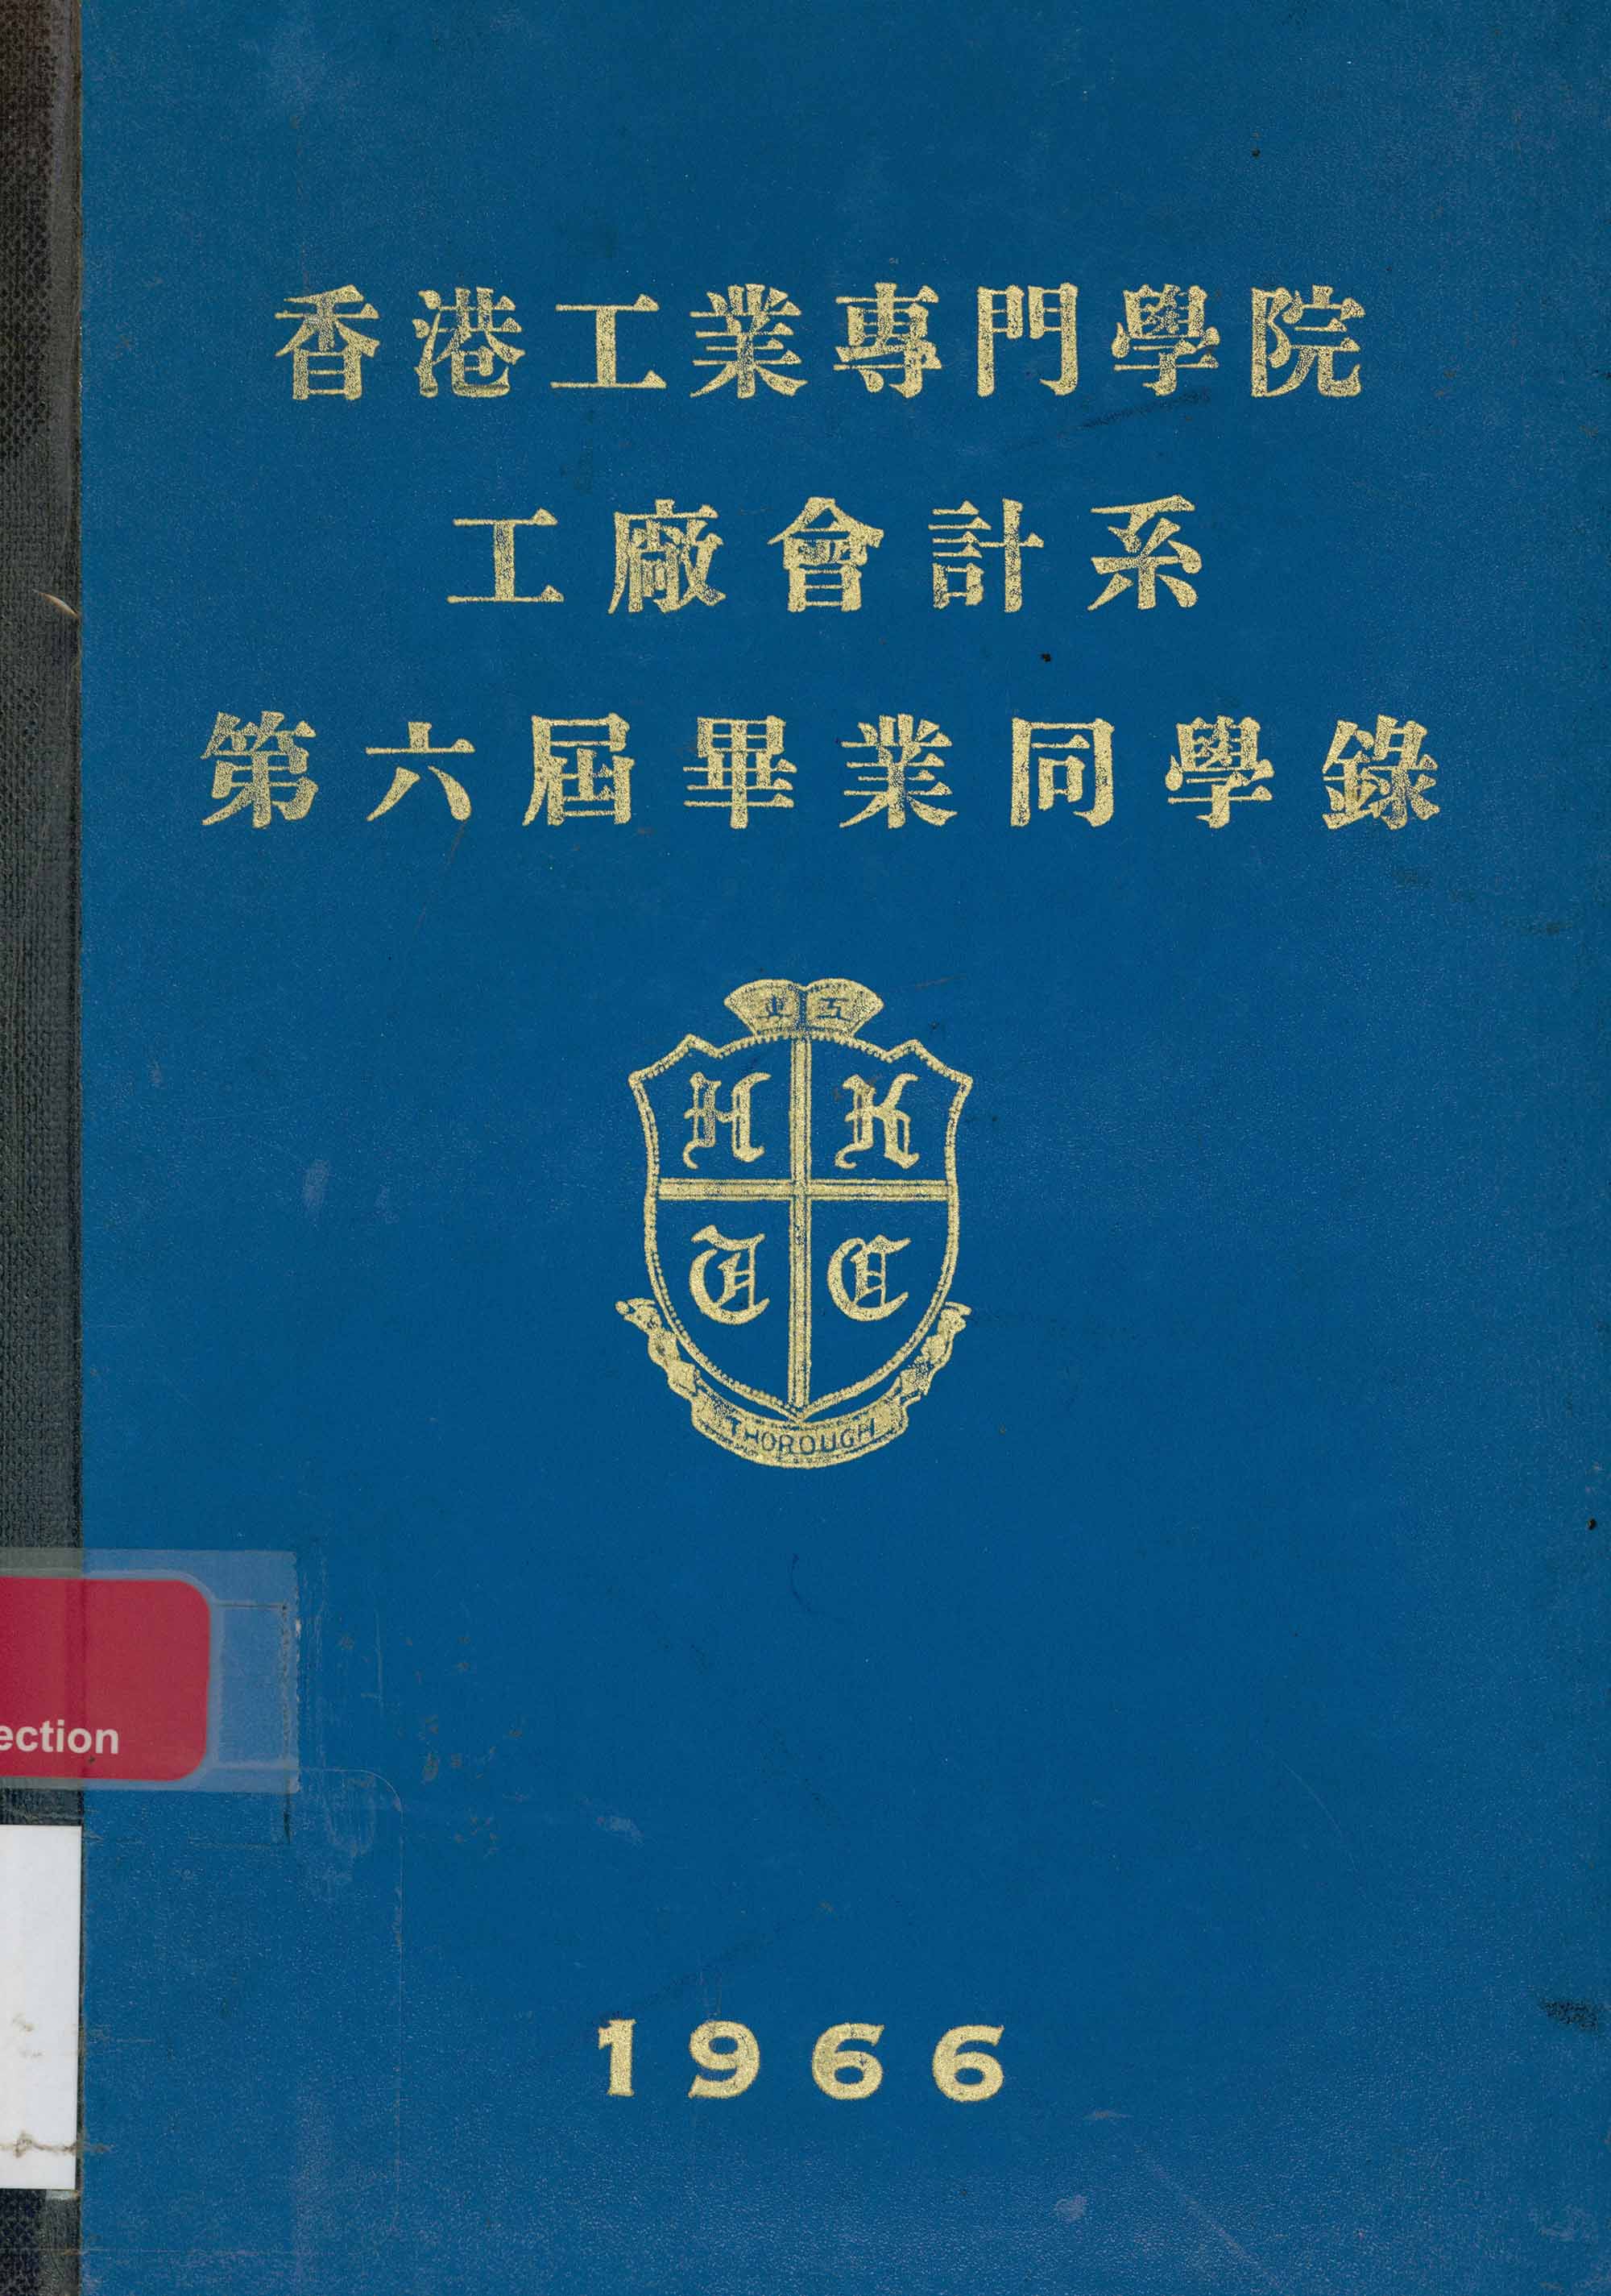 Hong Kong Technical College. Factory Accounts Course. 6th Year alumni dire[c]tory: Session 1964/66